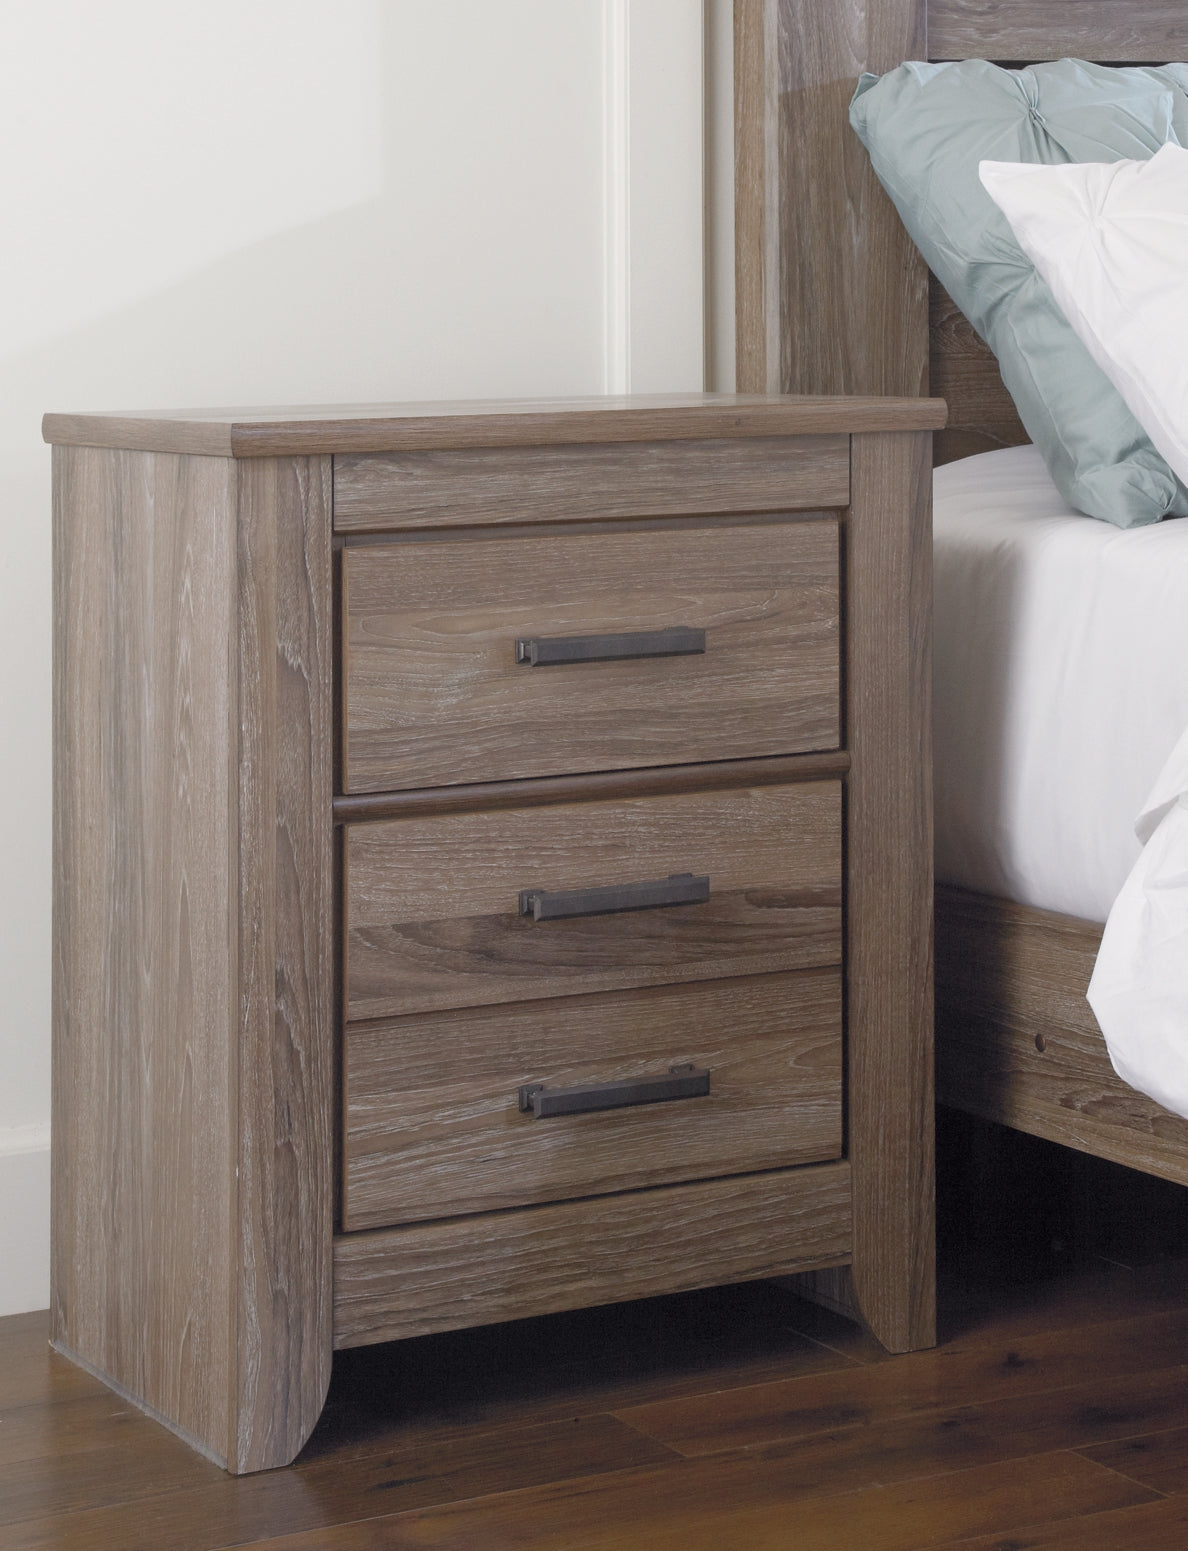 Zelen Two Drawer Night Stand Rent Wise Rent To Own Jacksonville, Florida